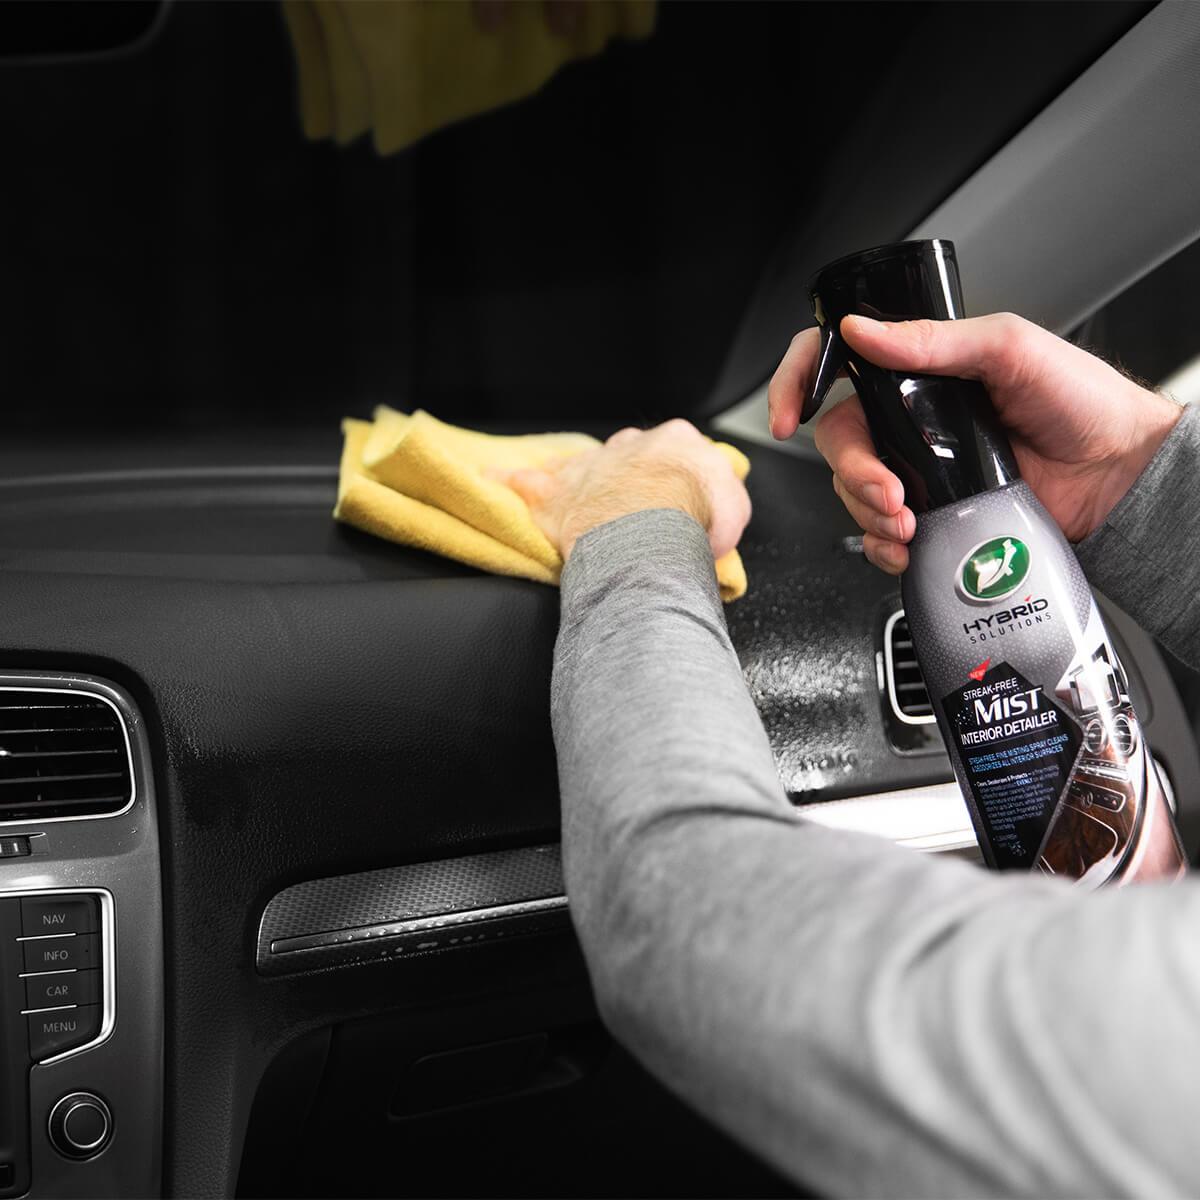 The Beginners Guide to Car Detailing (Like a Pro)